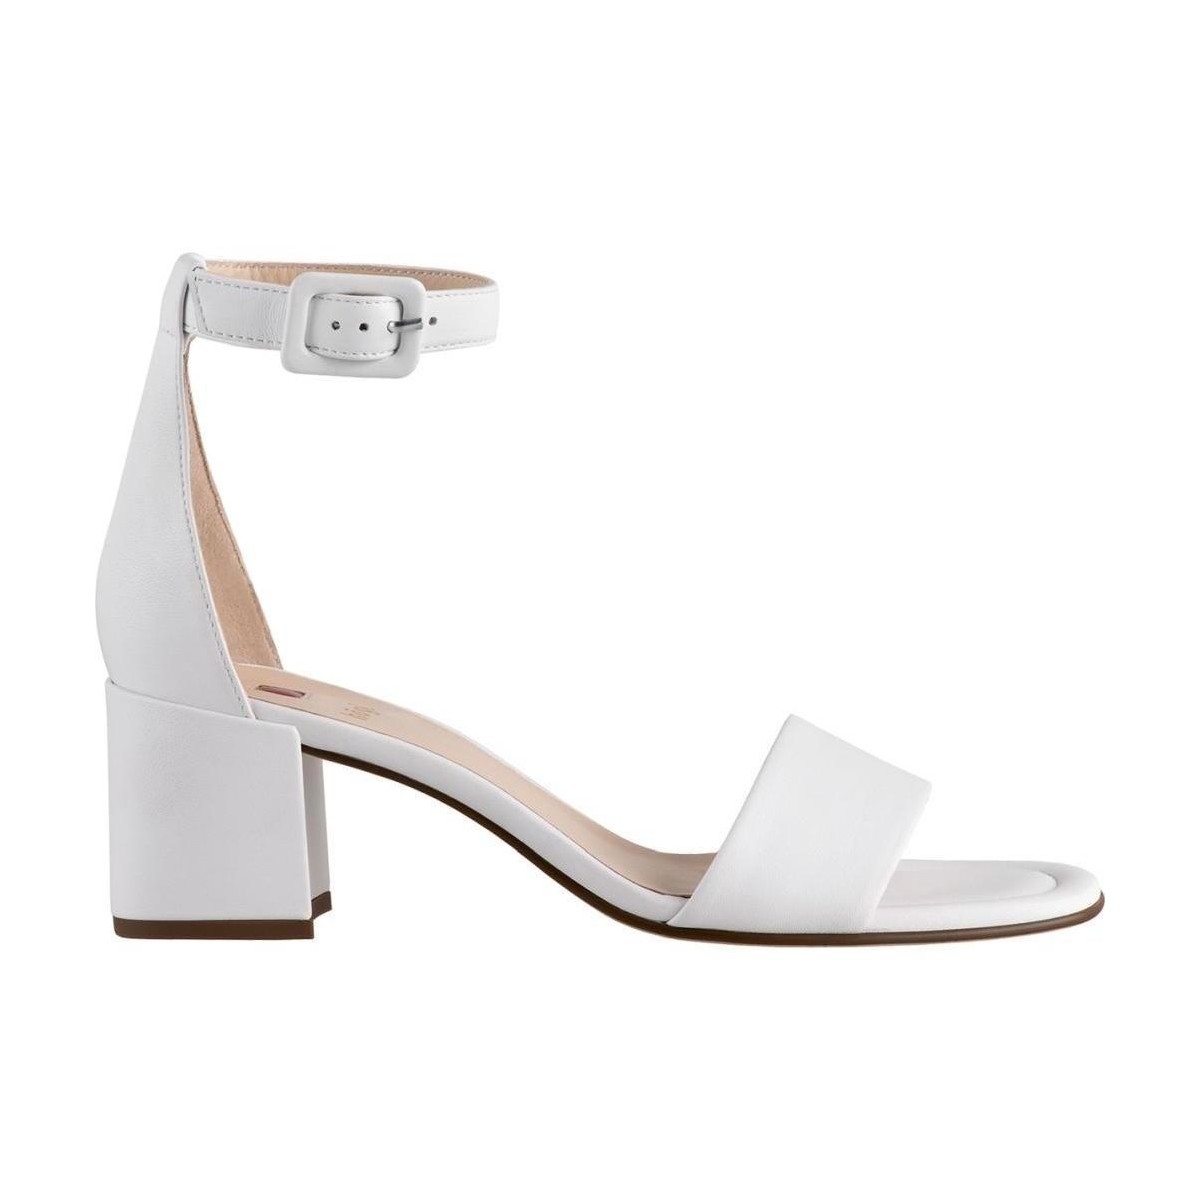 Chaussures Femme Duck And Cover Innocent High Heels White Blanc